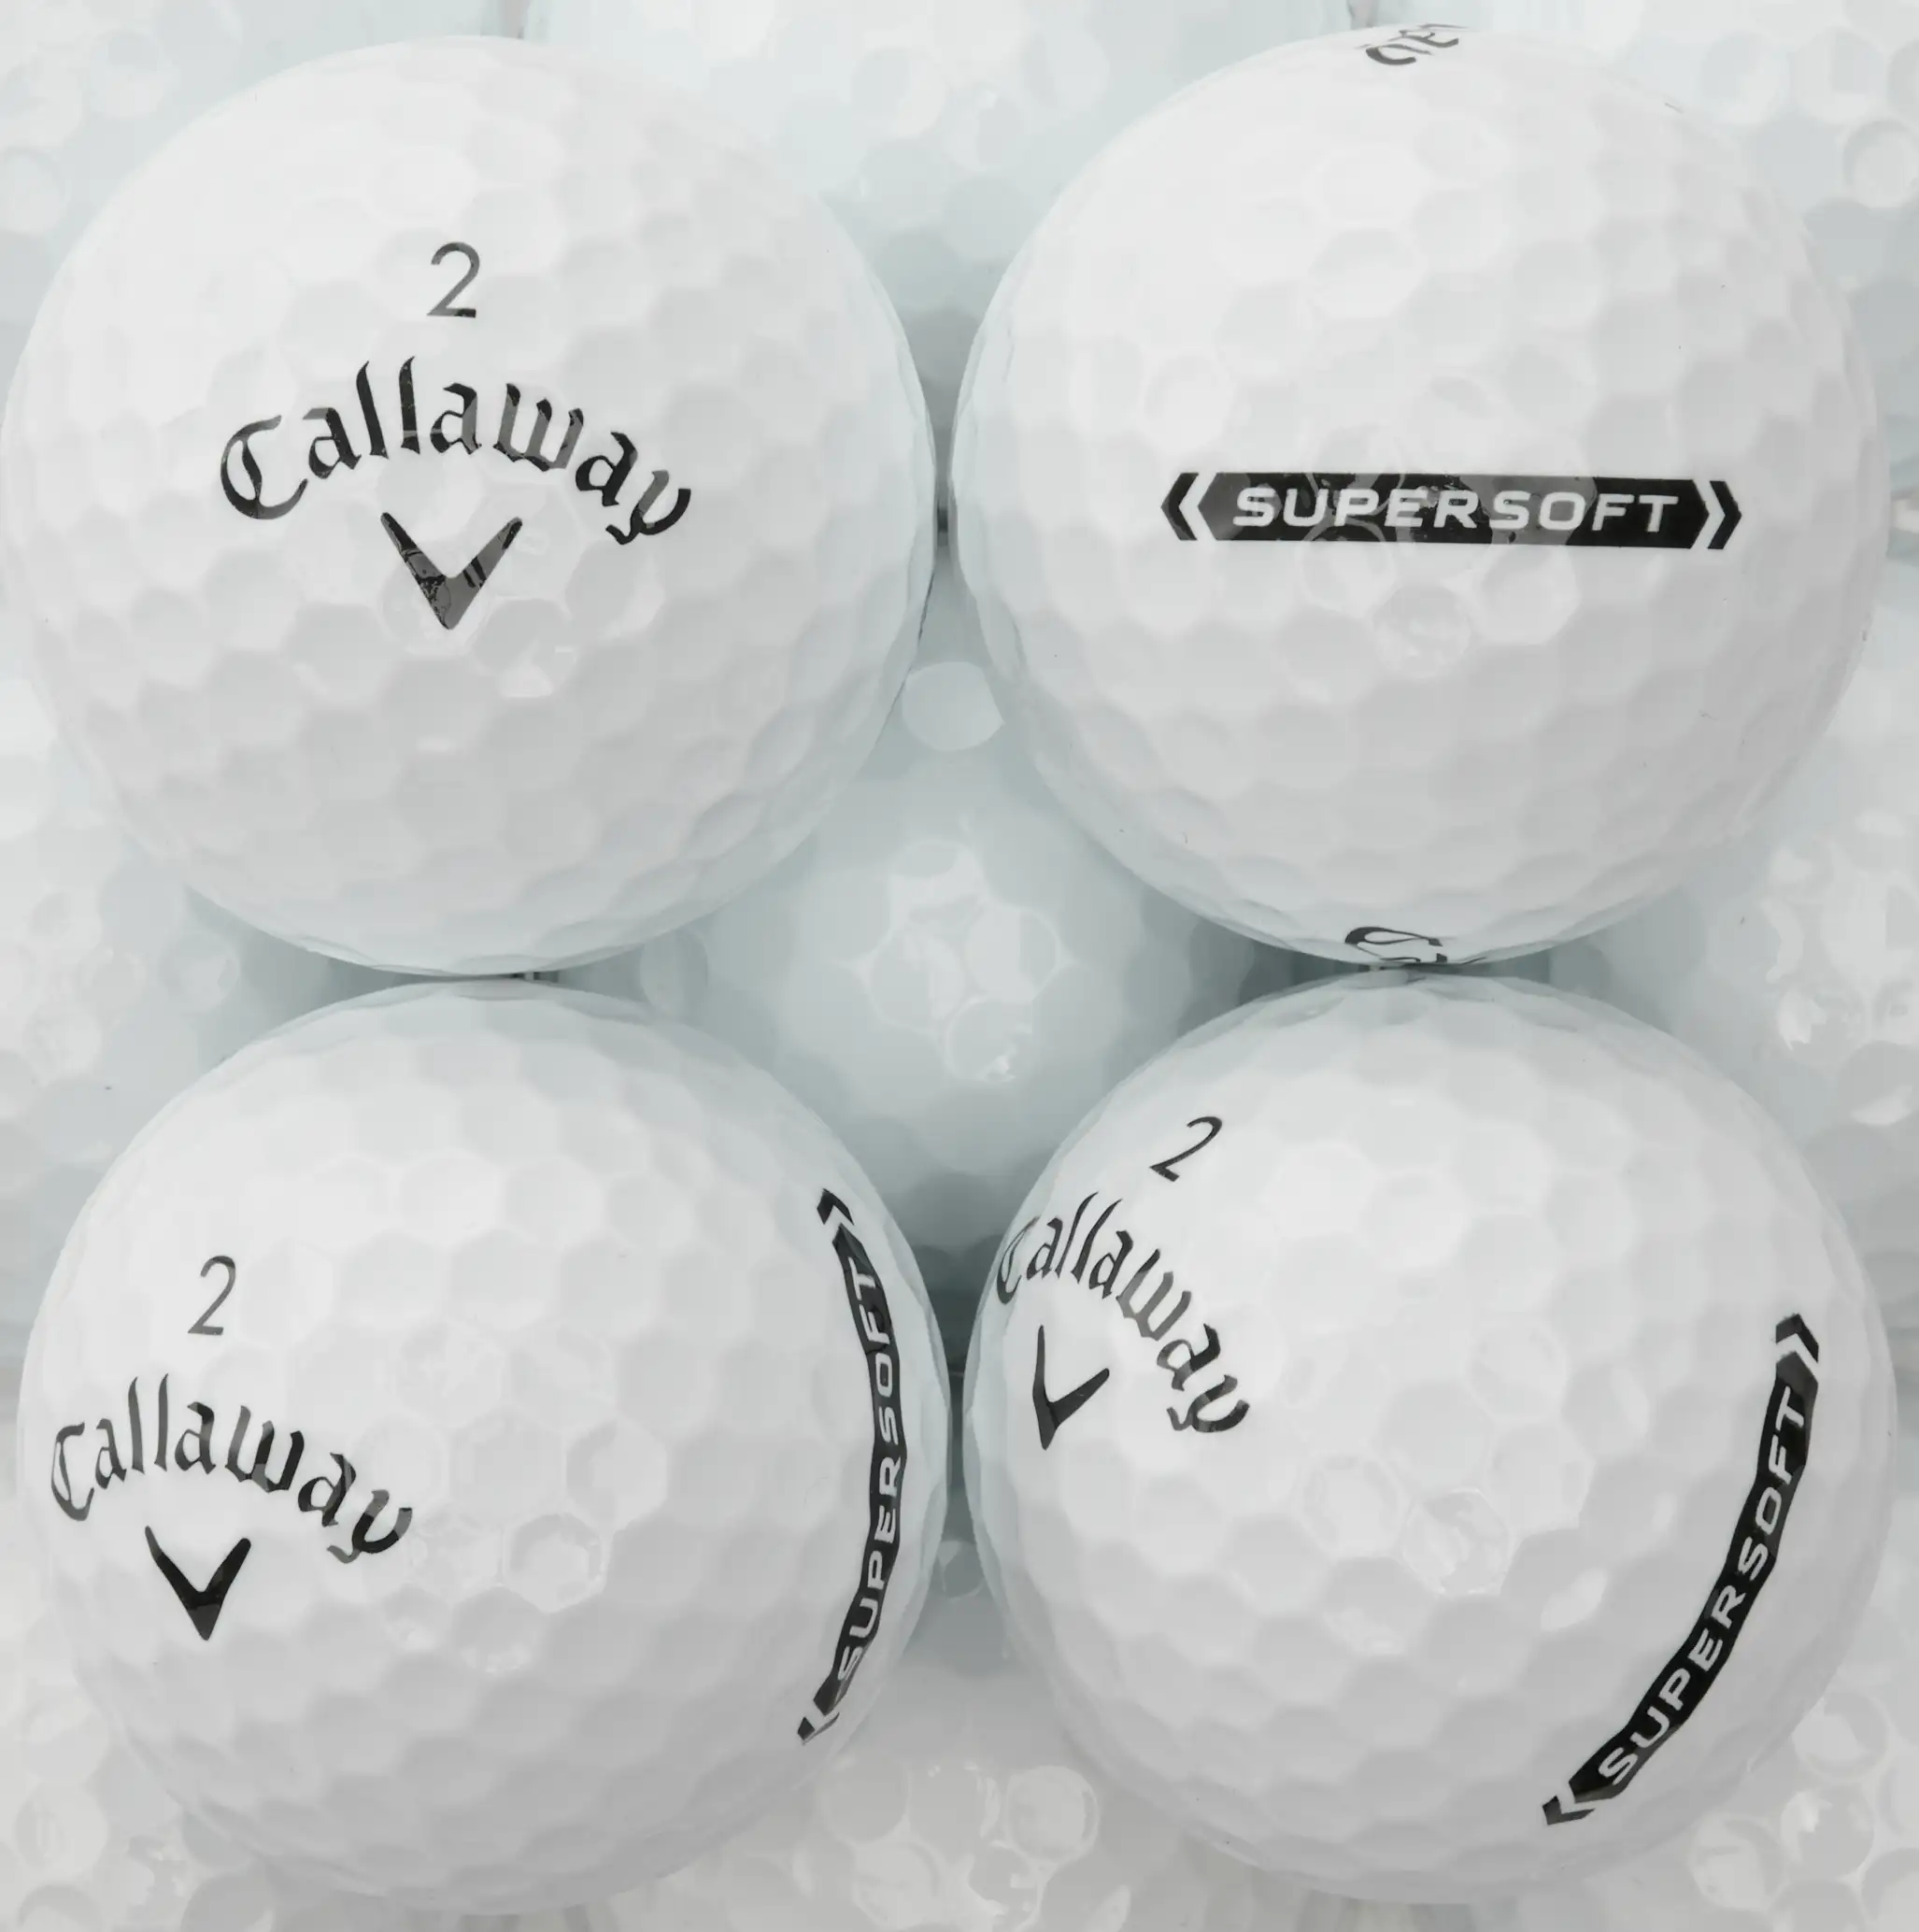 Callaway Supersoft, white